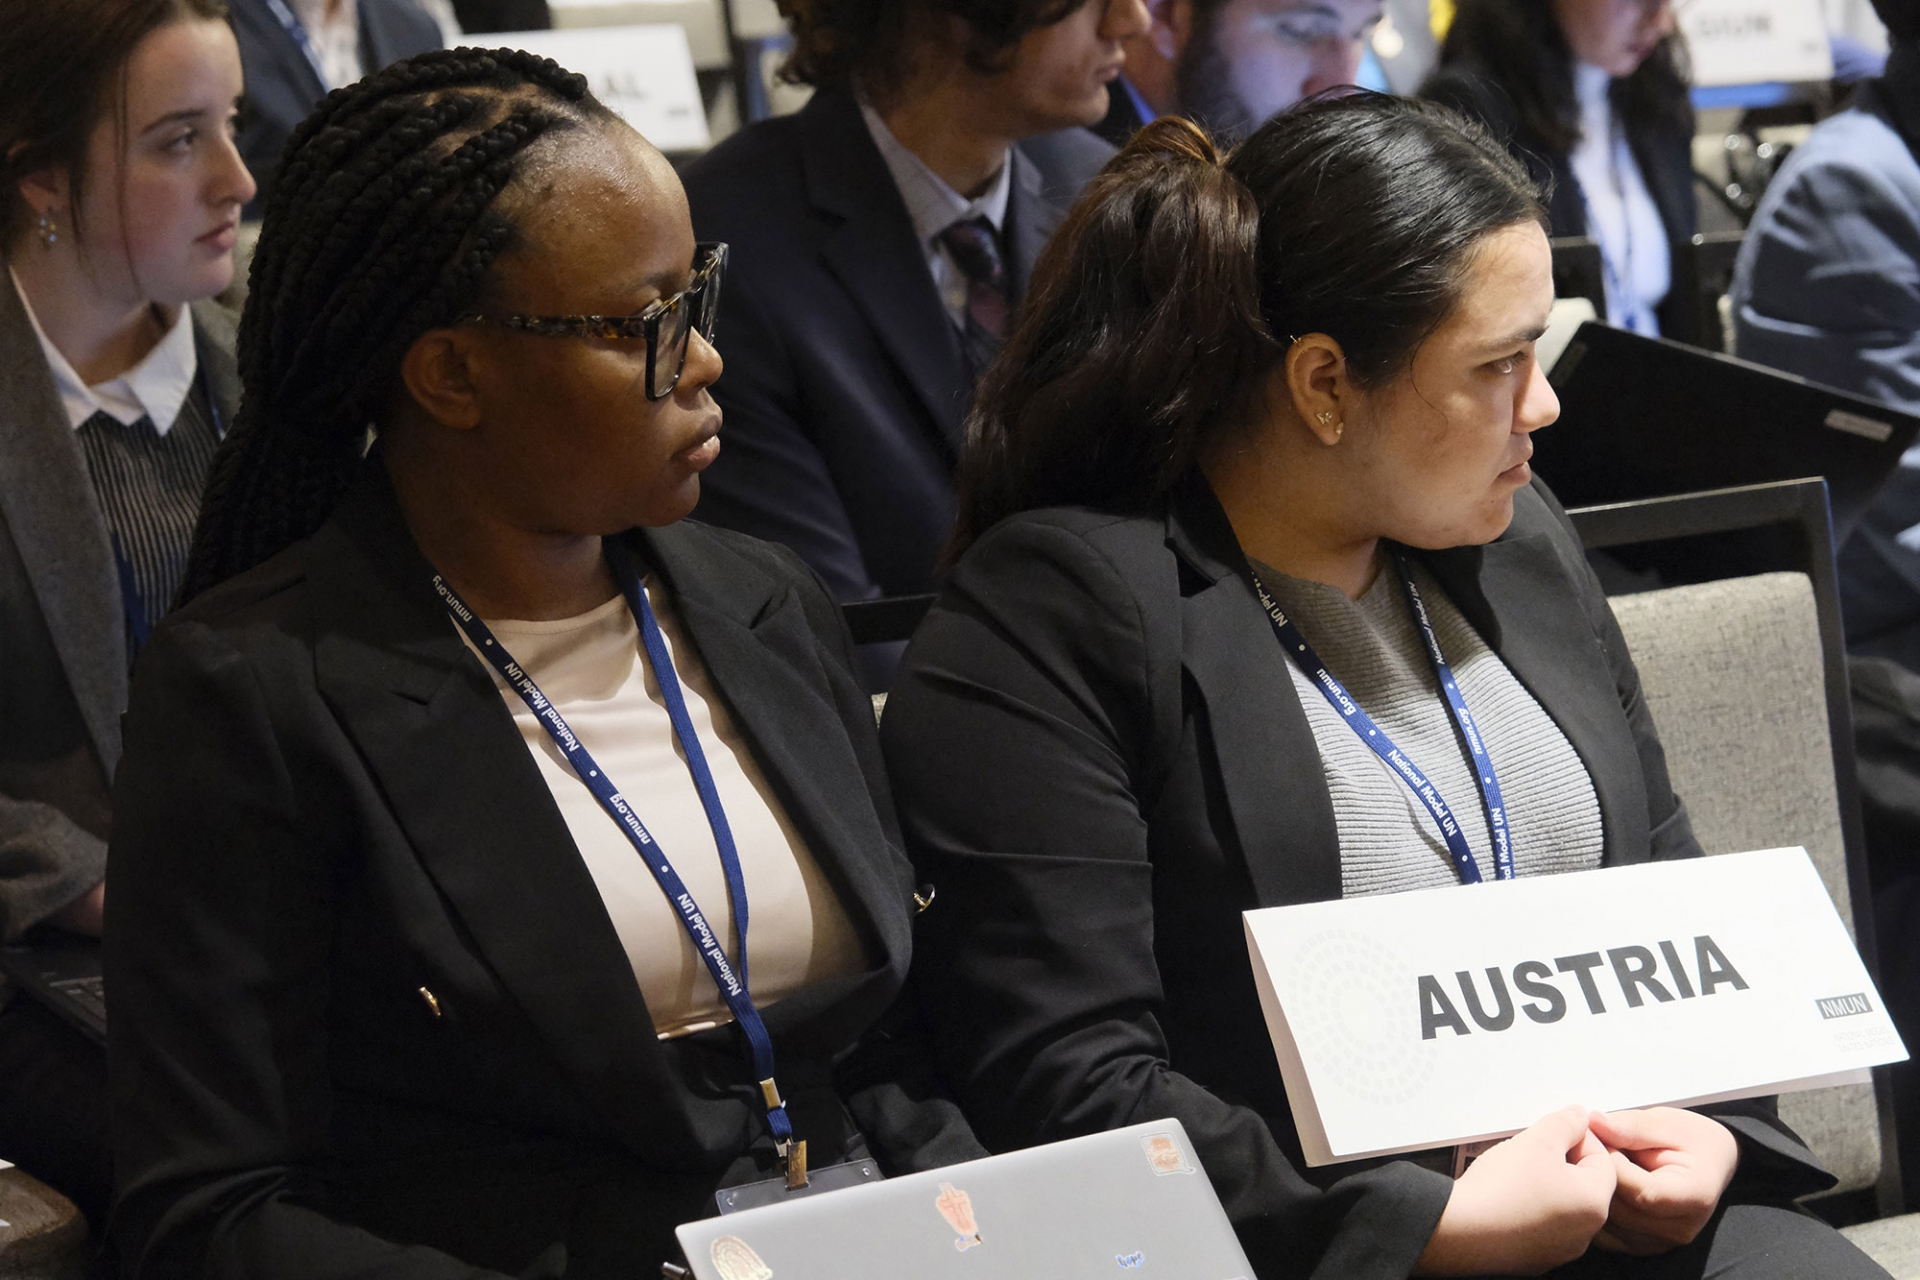 The CSUSB Model UN team represented the nation of Austria at the national conference.